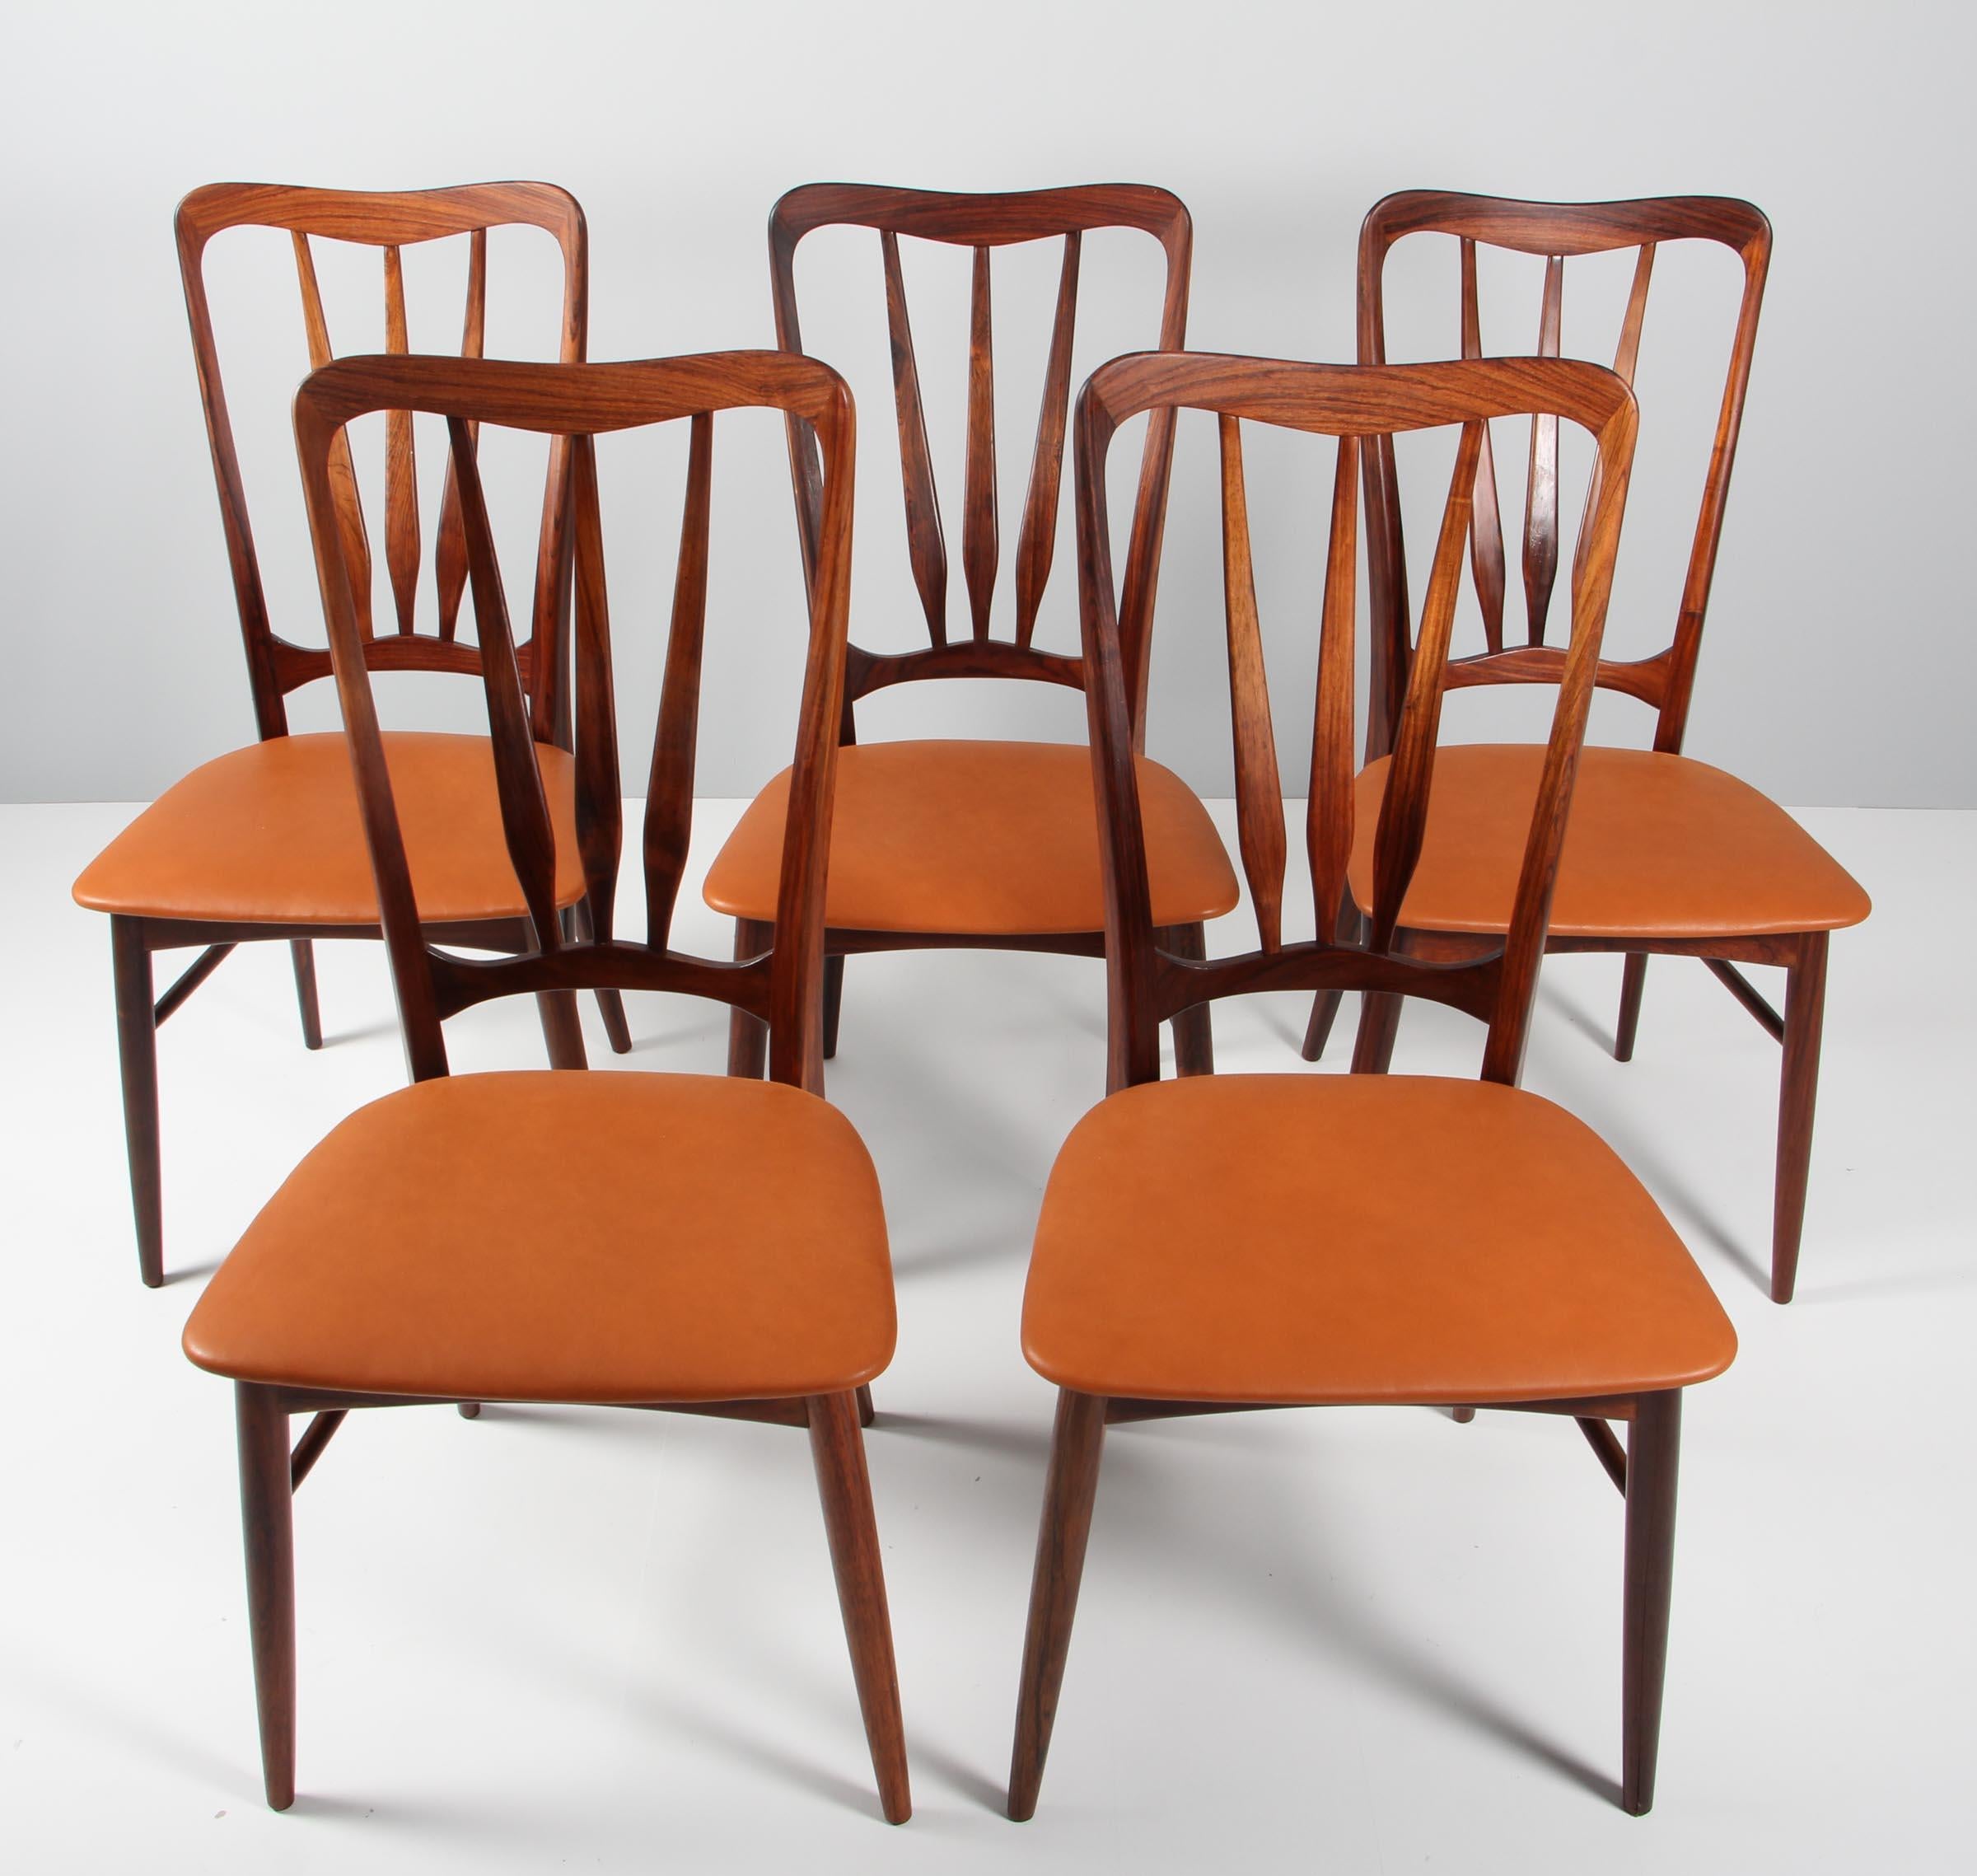 Set of five Niels Koefoed dining chairs in rosewood.

New upholstered with cognac aniline leather.

Made by Koefoeds Møbelfabrik.